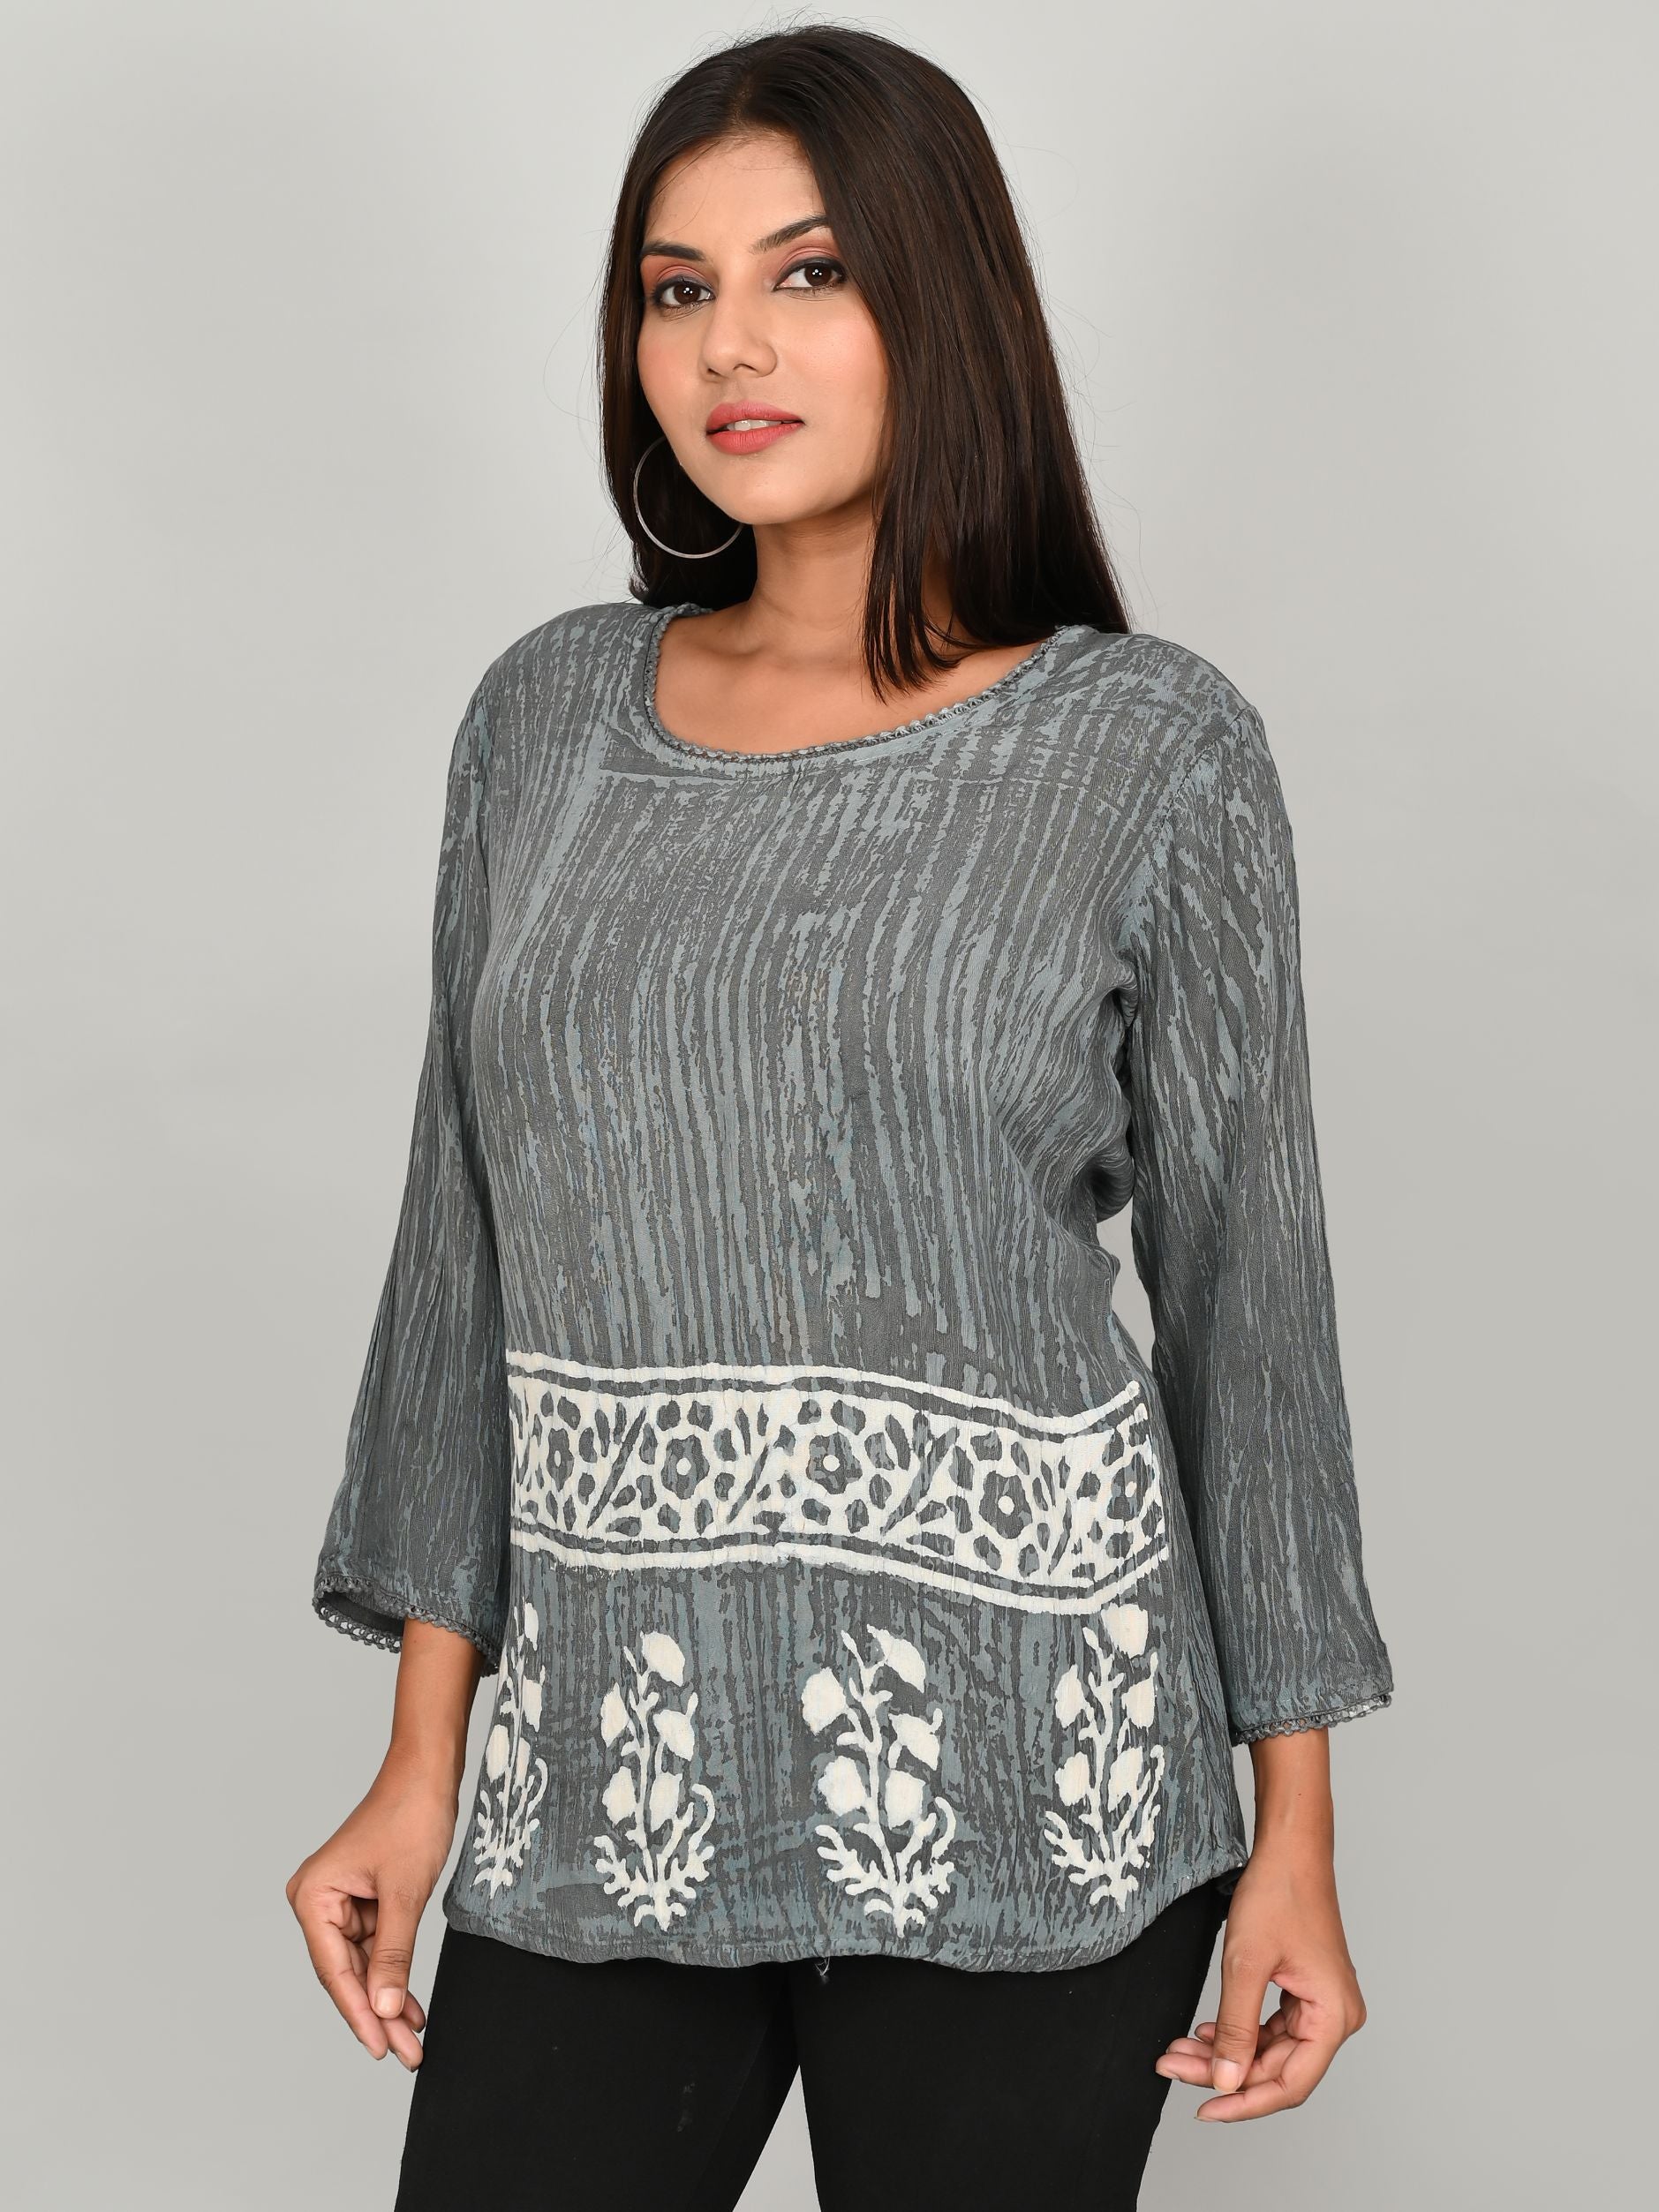 Made from luxurious grey silk crepe, this printed casual top is the perfect addition to any girls' or women's wardrobe. The soft and lightweight material provides both comfort and style, making this top perfect for everyday wear. Its unique print adds a touch of elegance to any outfit.